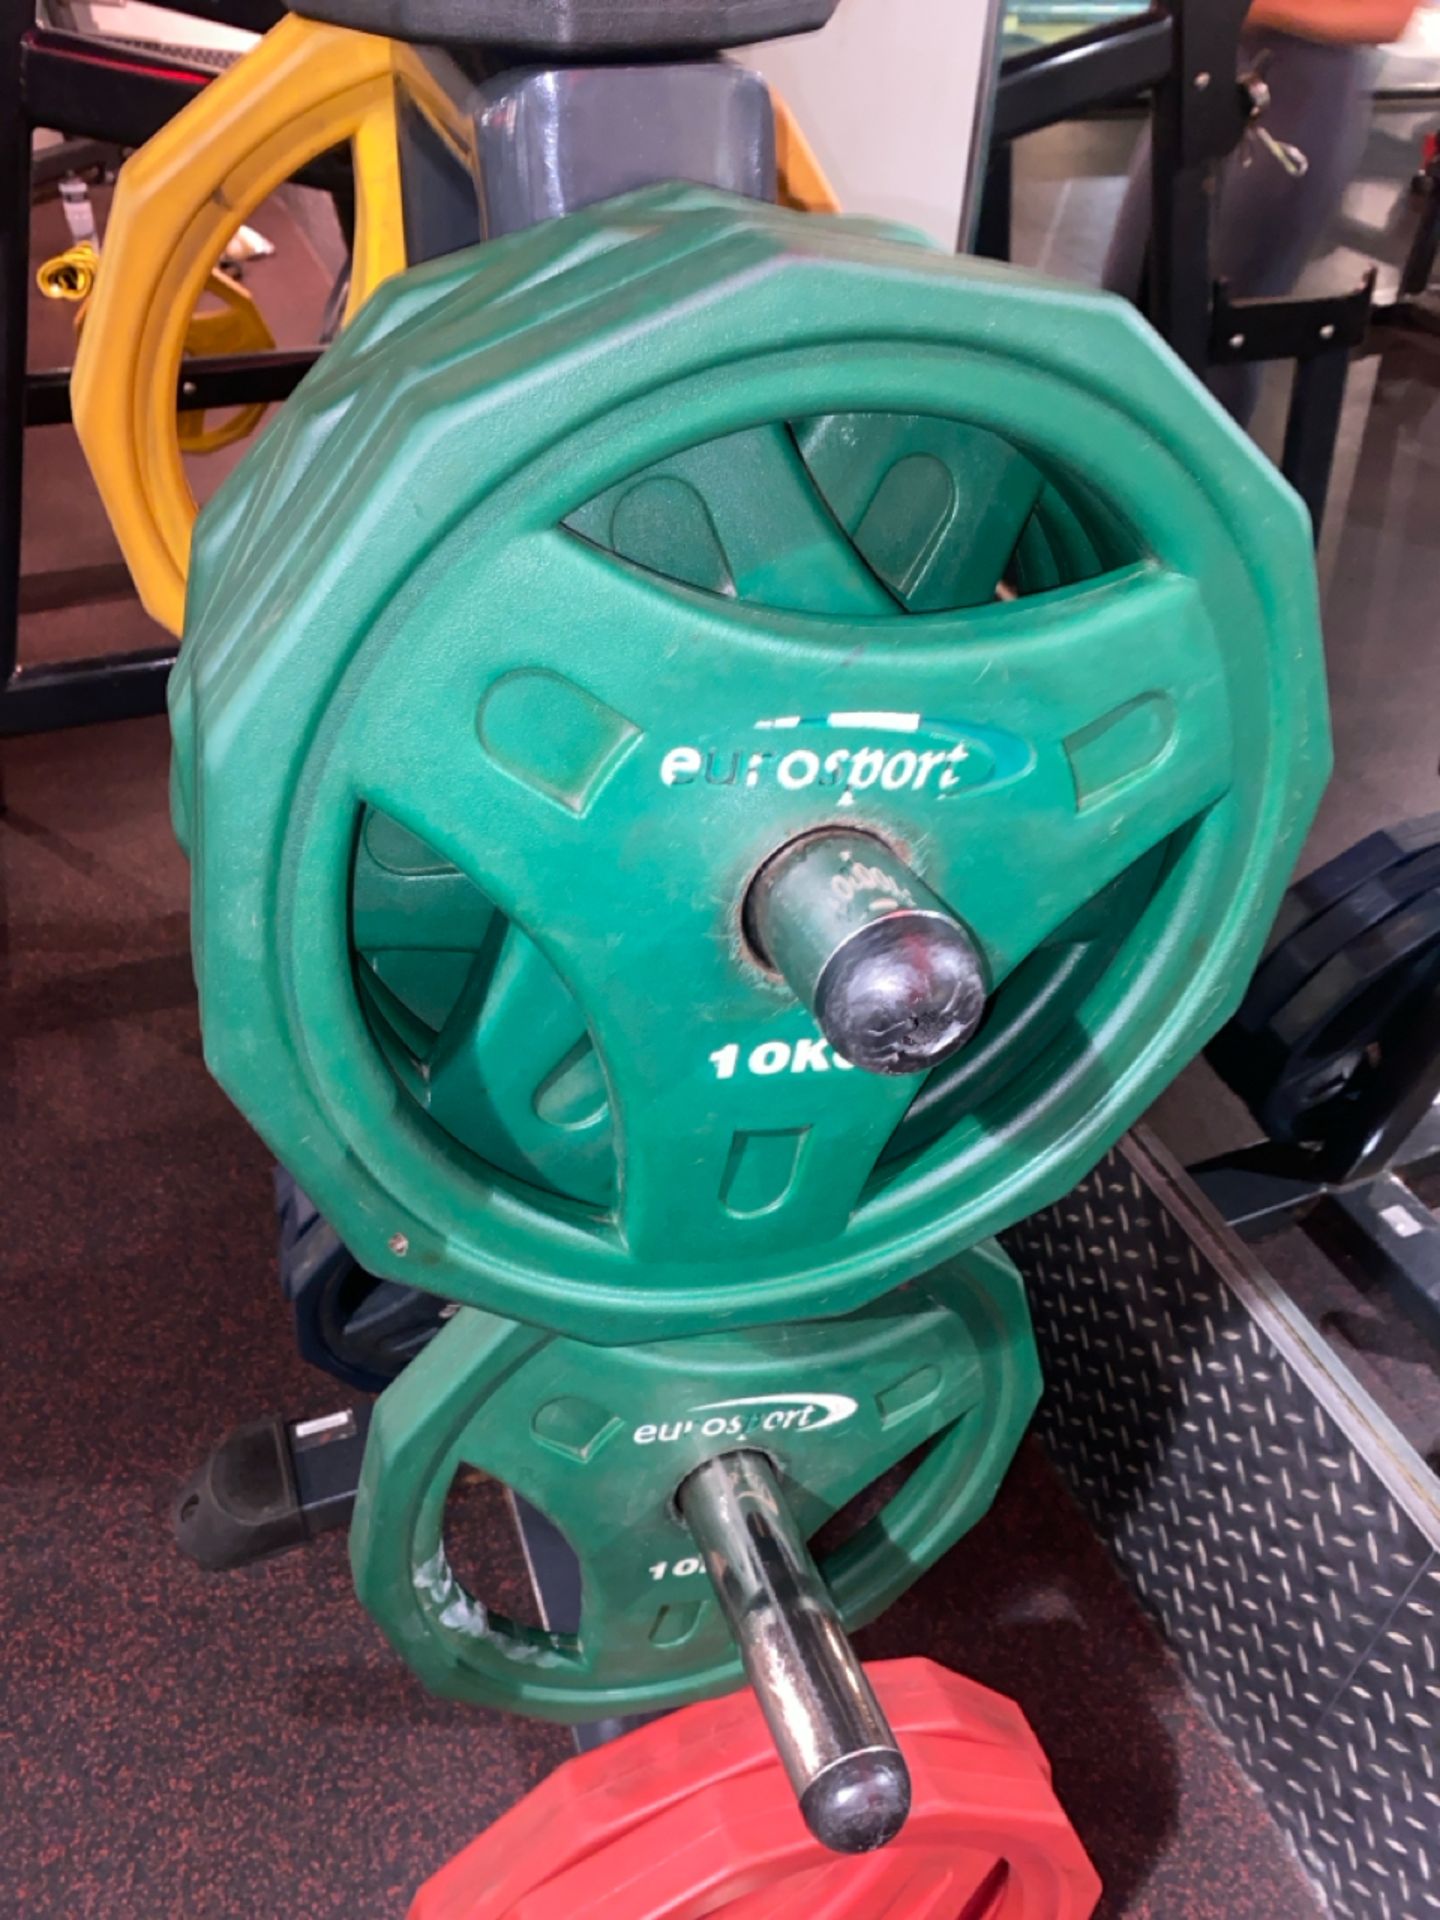 4 x 10kg Plates - Image 2 of 3